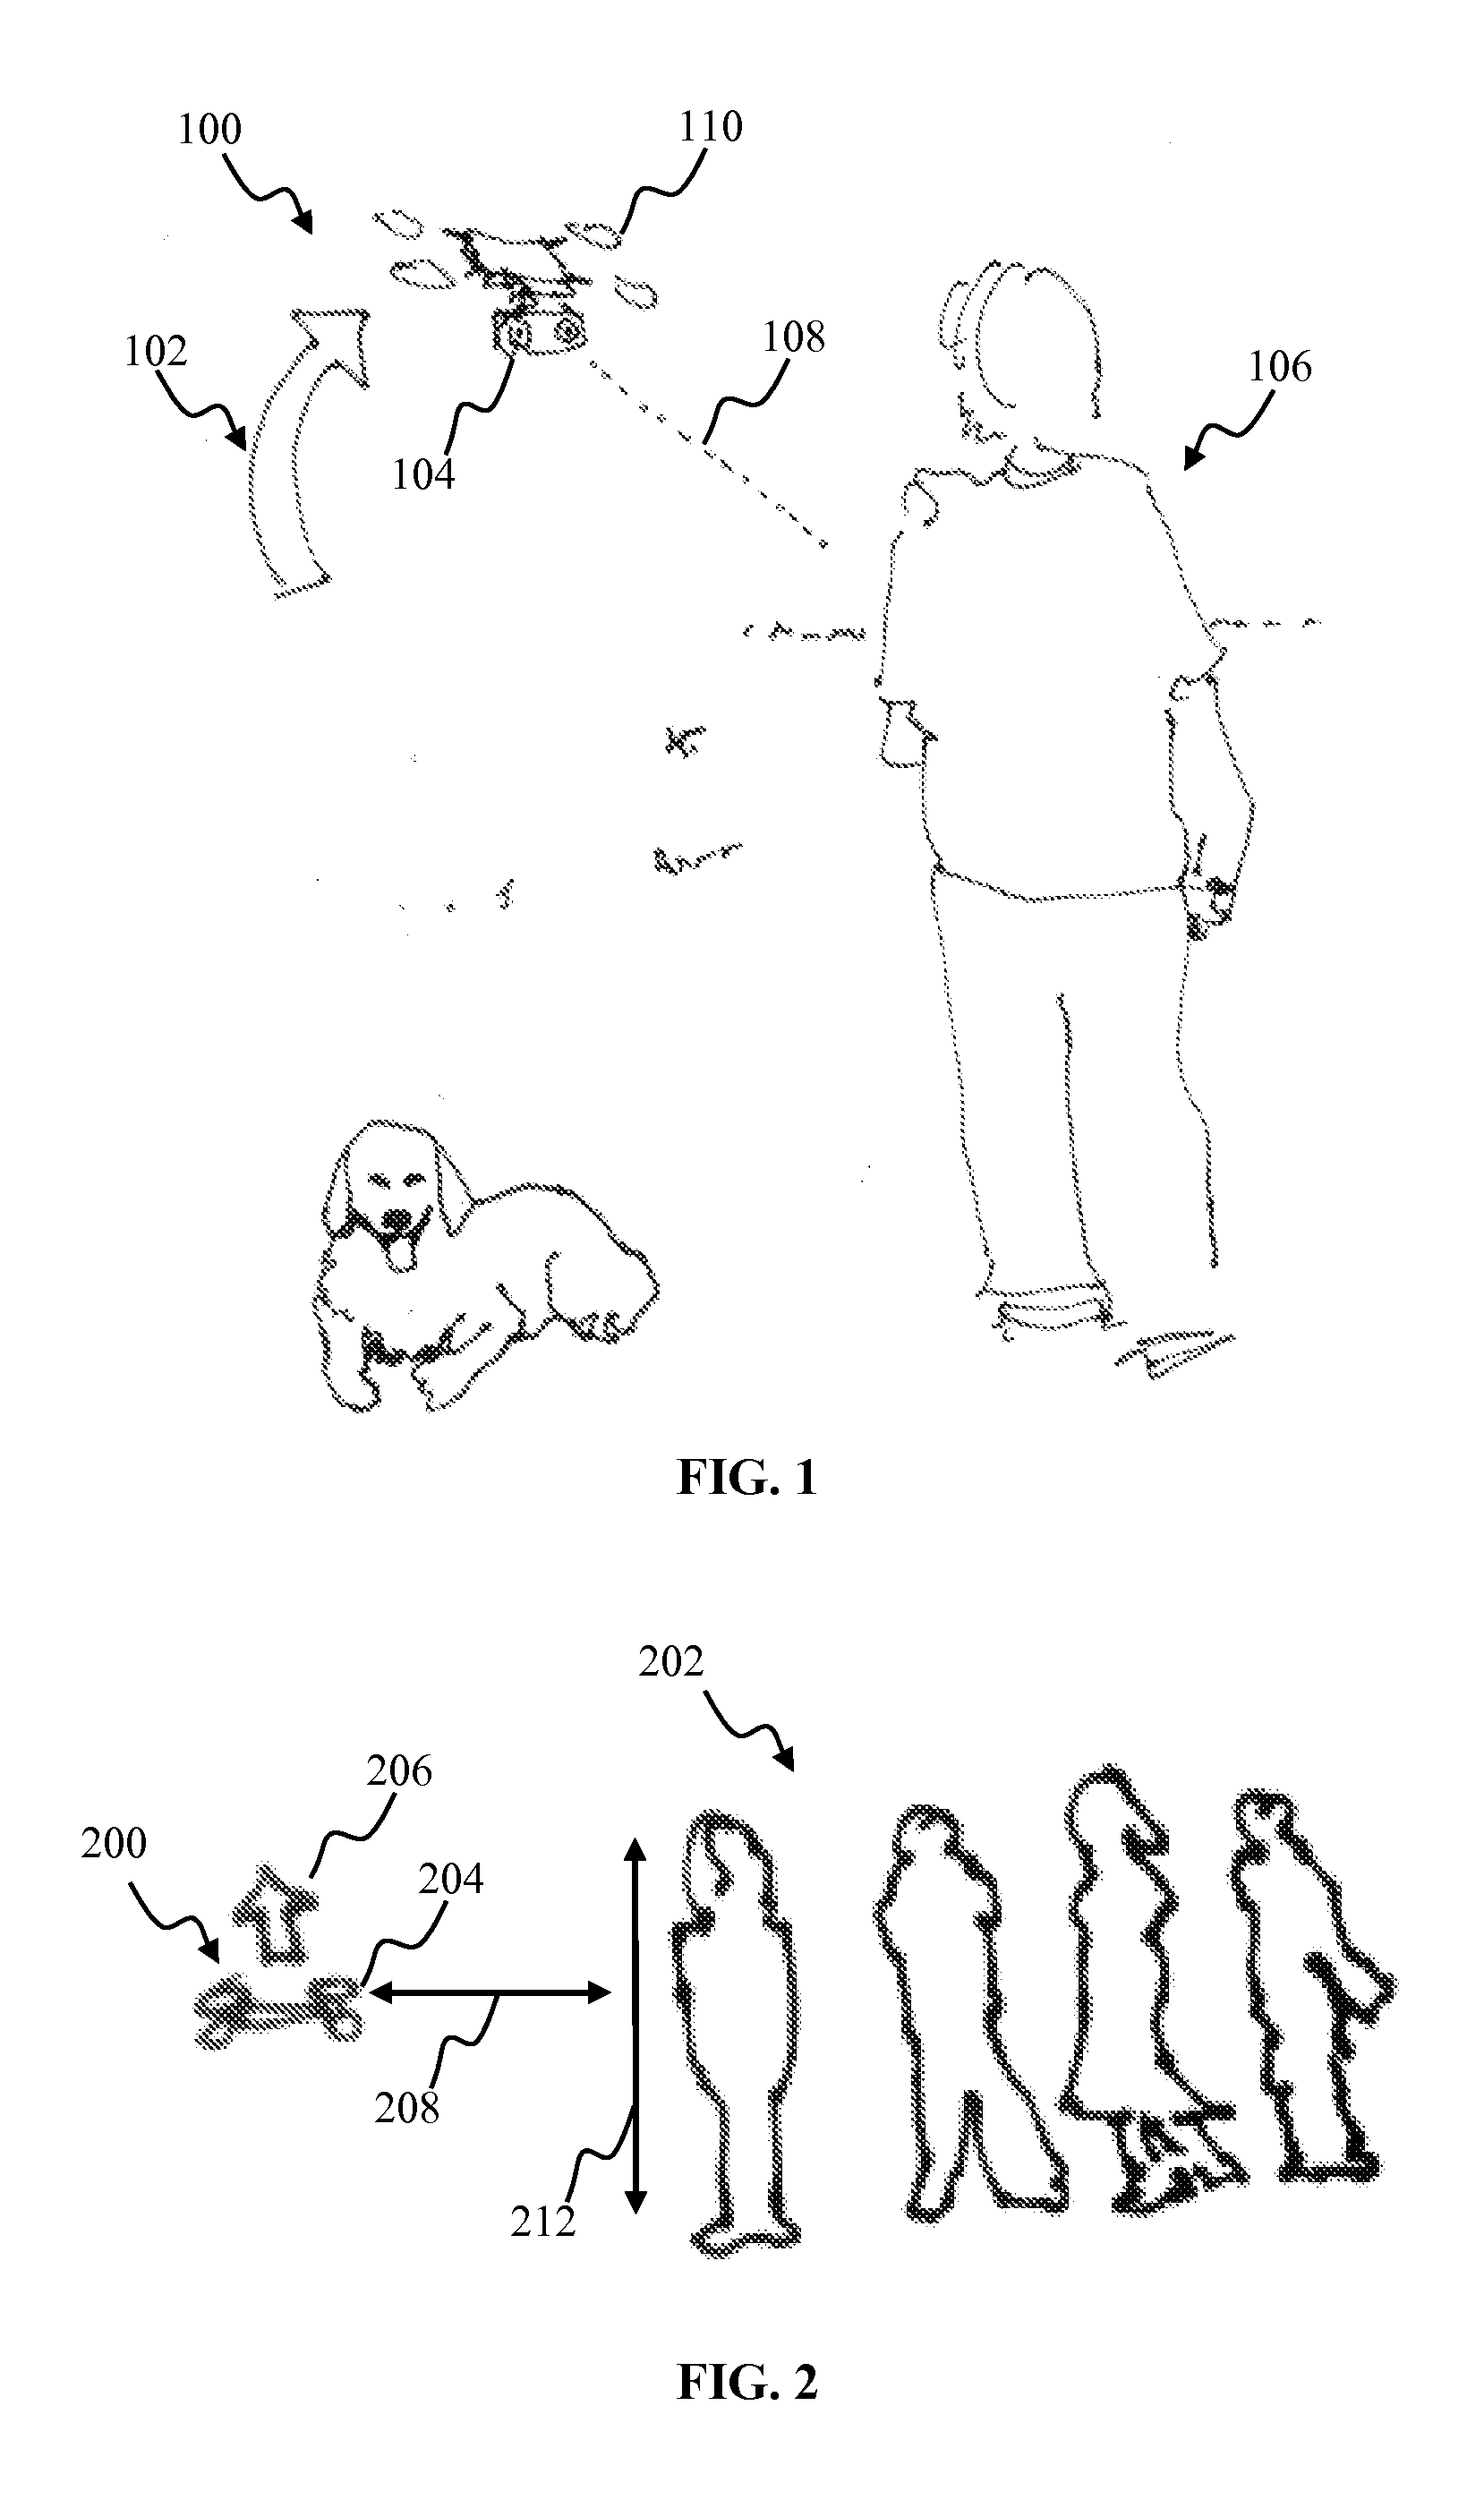 Apparatus and methods for tracking using aerial video